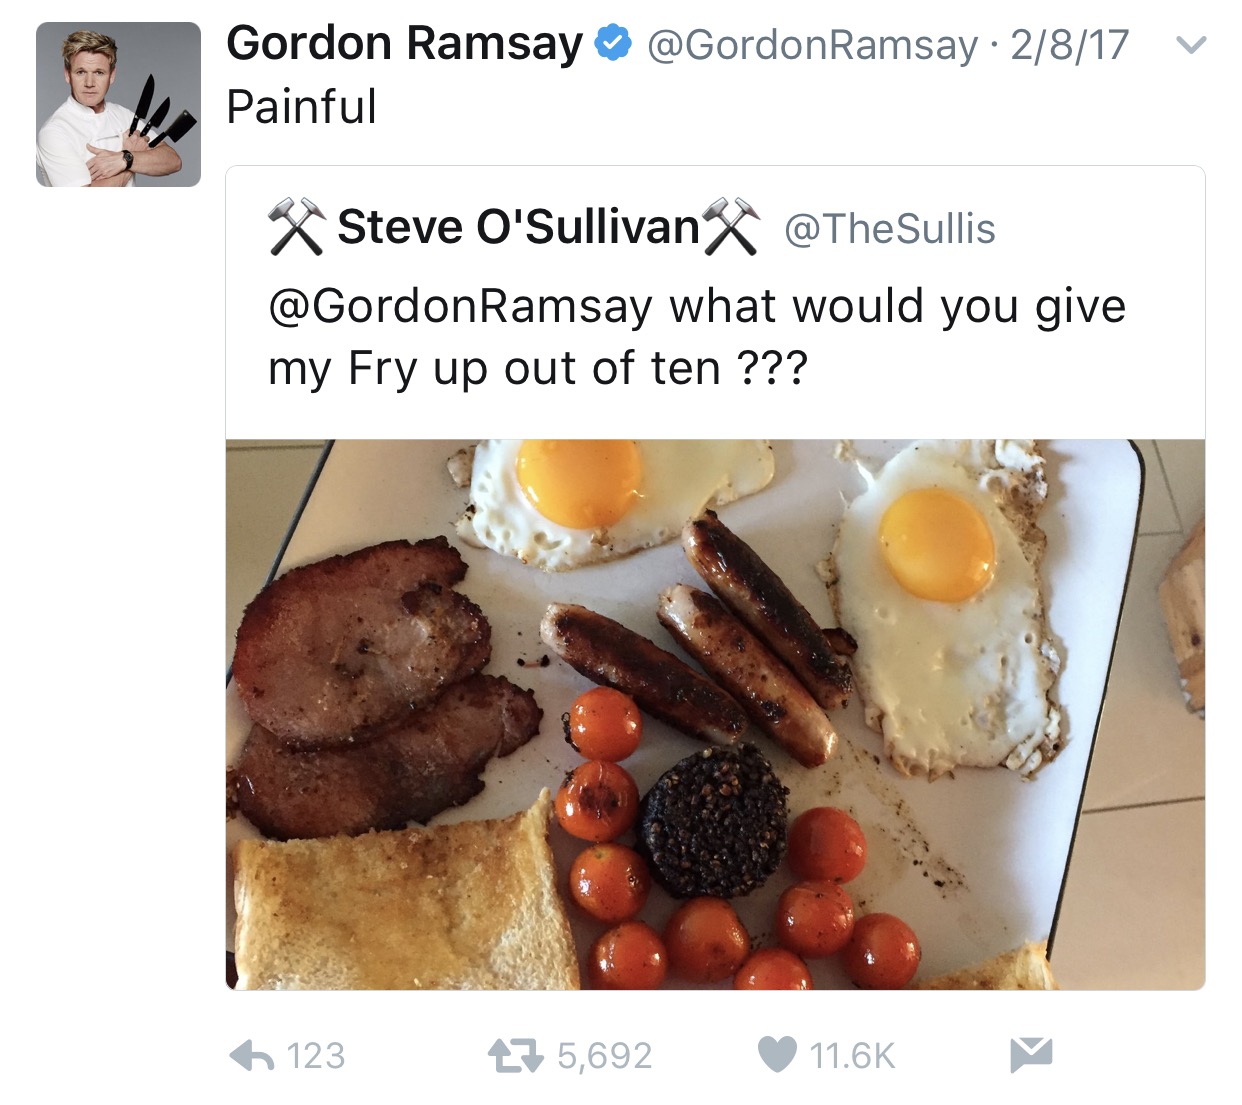 tweet - gordon ramsay food reviews - Gordon Ramsay Painful Ramsay 2817 V Steve O'Sullivanx Ramsay what would you give my Fry up out of ten ??? 123 27 5,692 ~